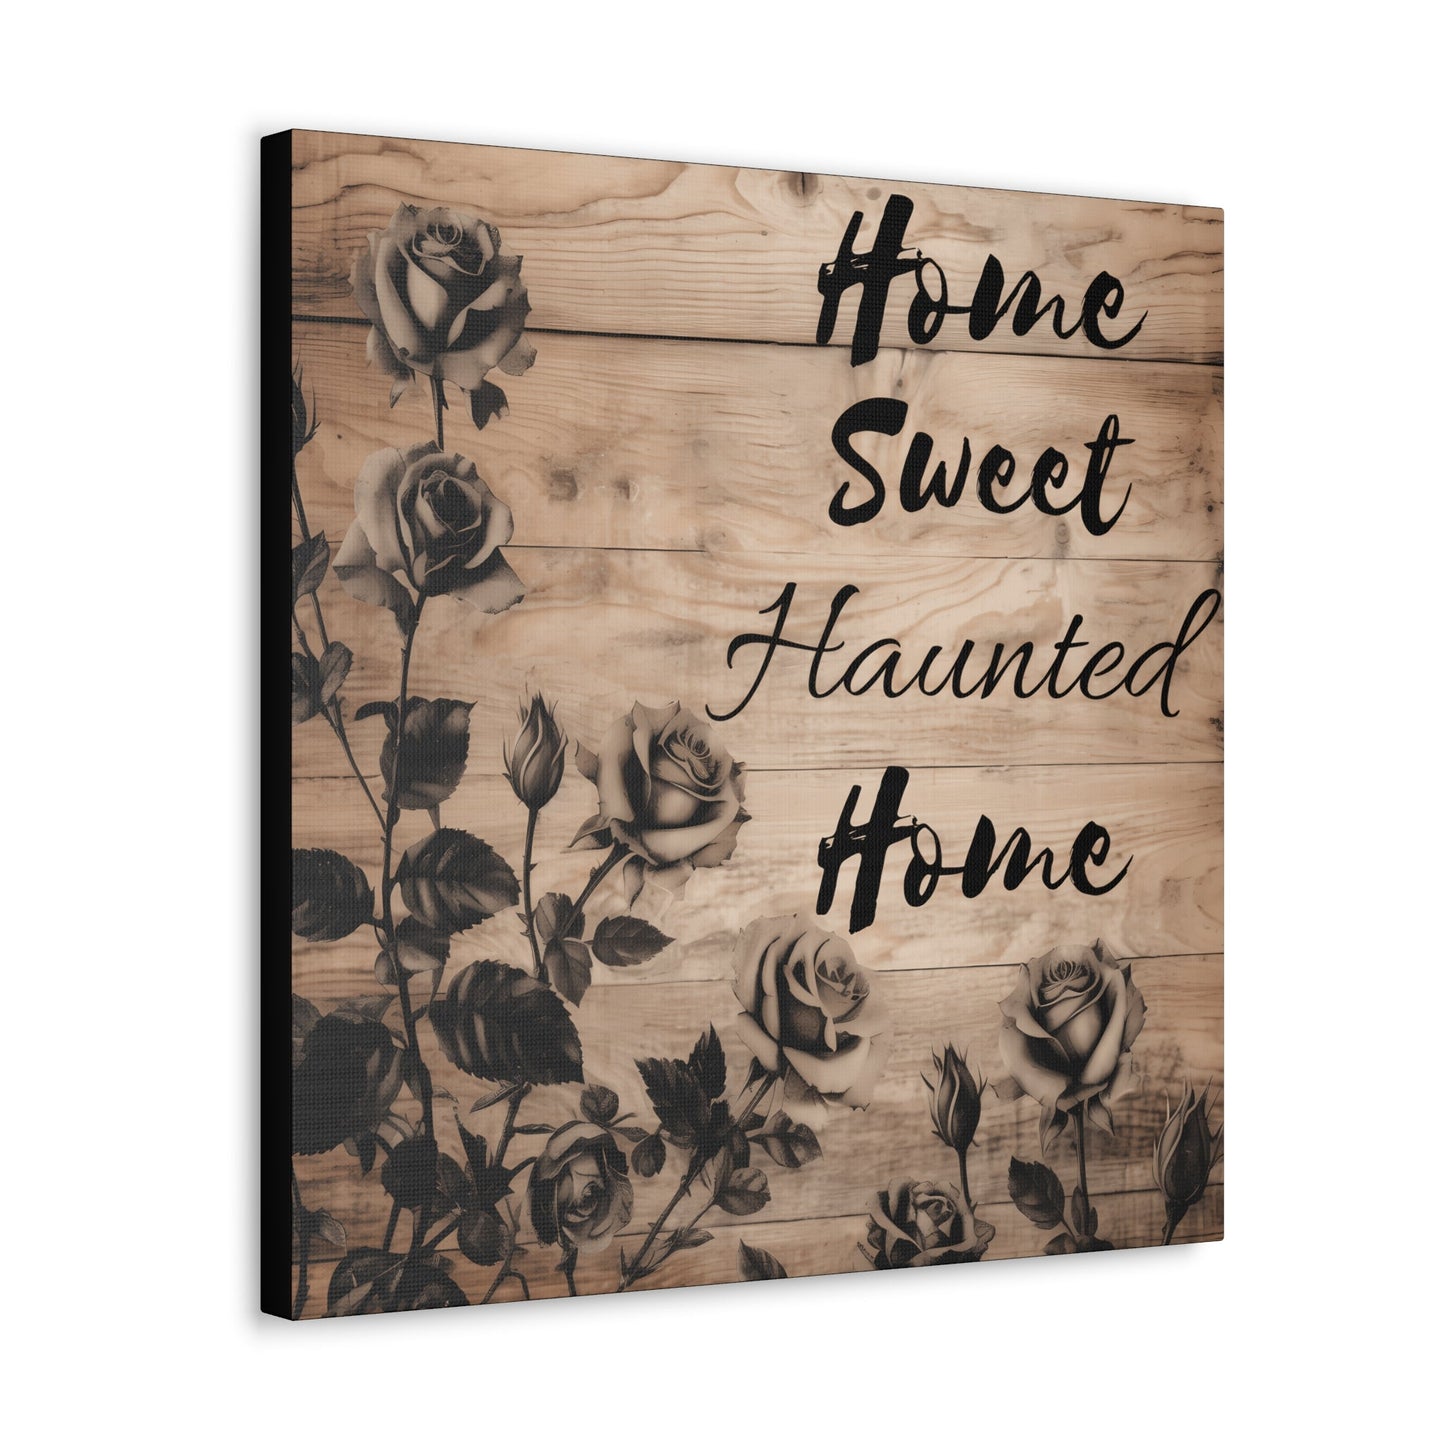 Home Sweet Haunted Home Black Roses Canvas Gallery WrapCanvasVTZdesigns20″ x 20″1.25"Art & Wall DecorCanvasFall Picks